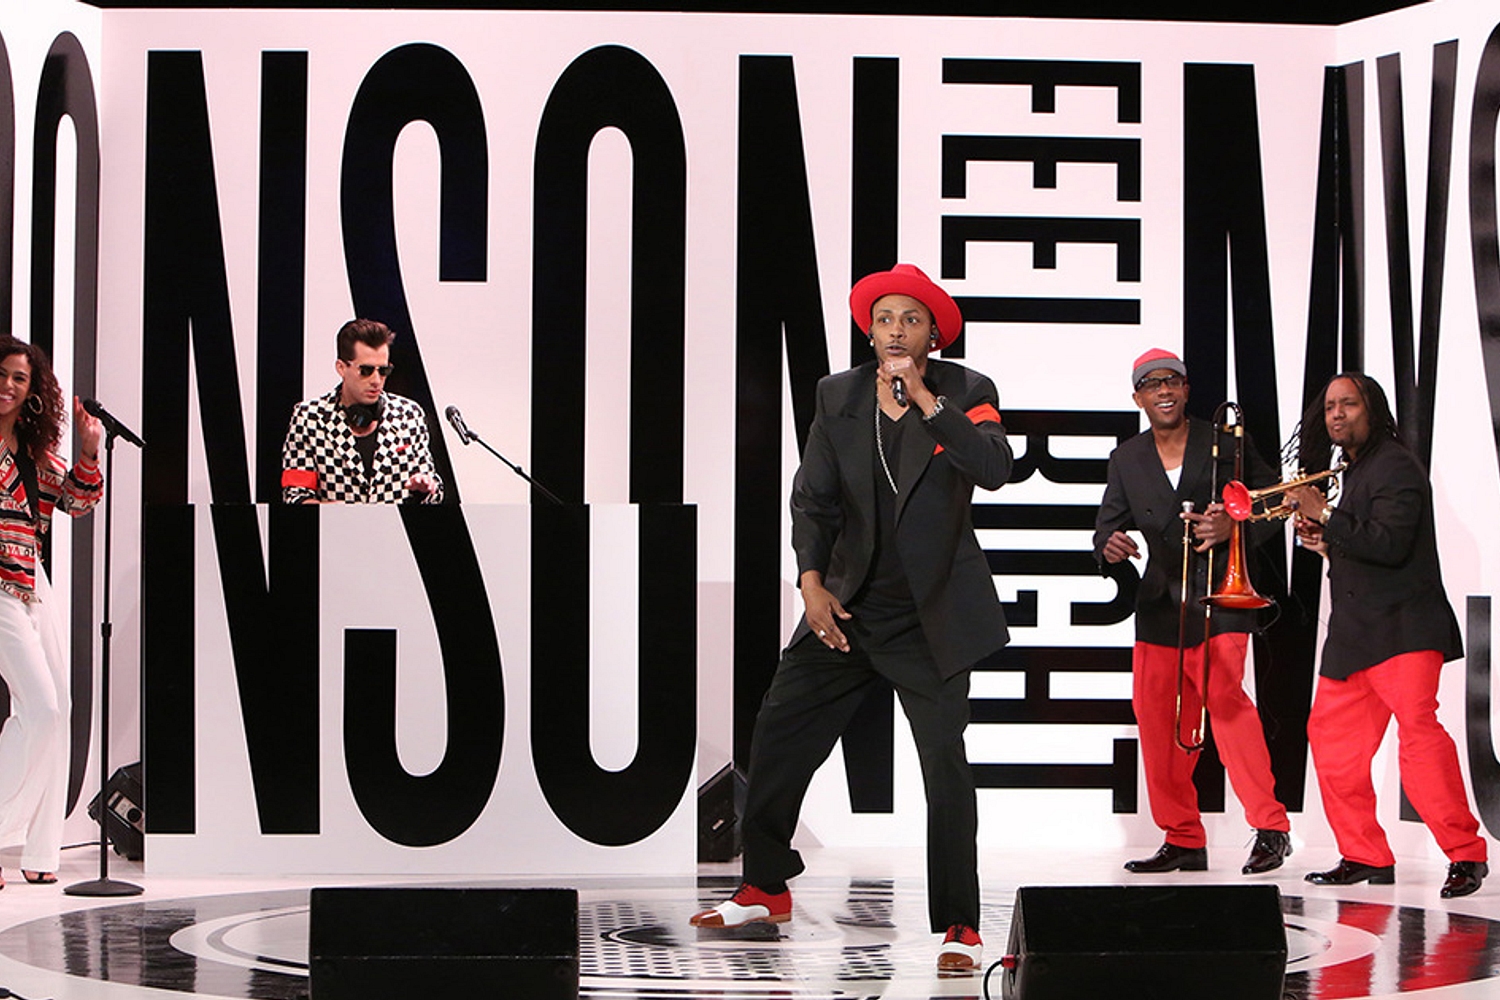 Watch Mark Ronson and Mystikal bring ‘Feel Right’ to Ellen